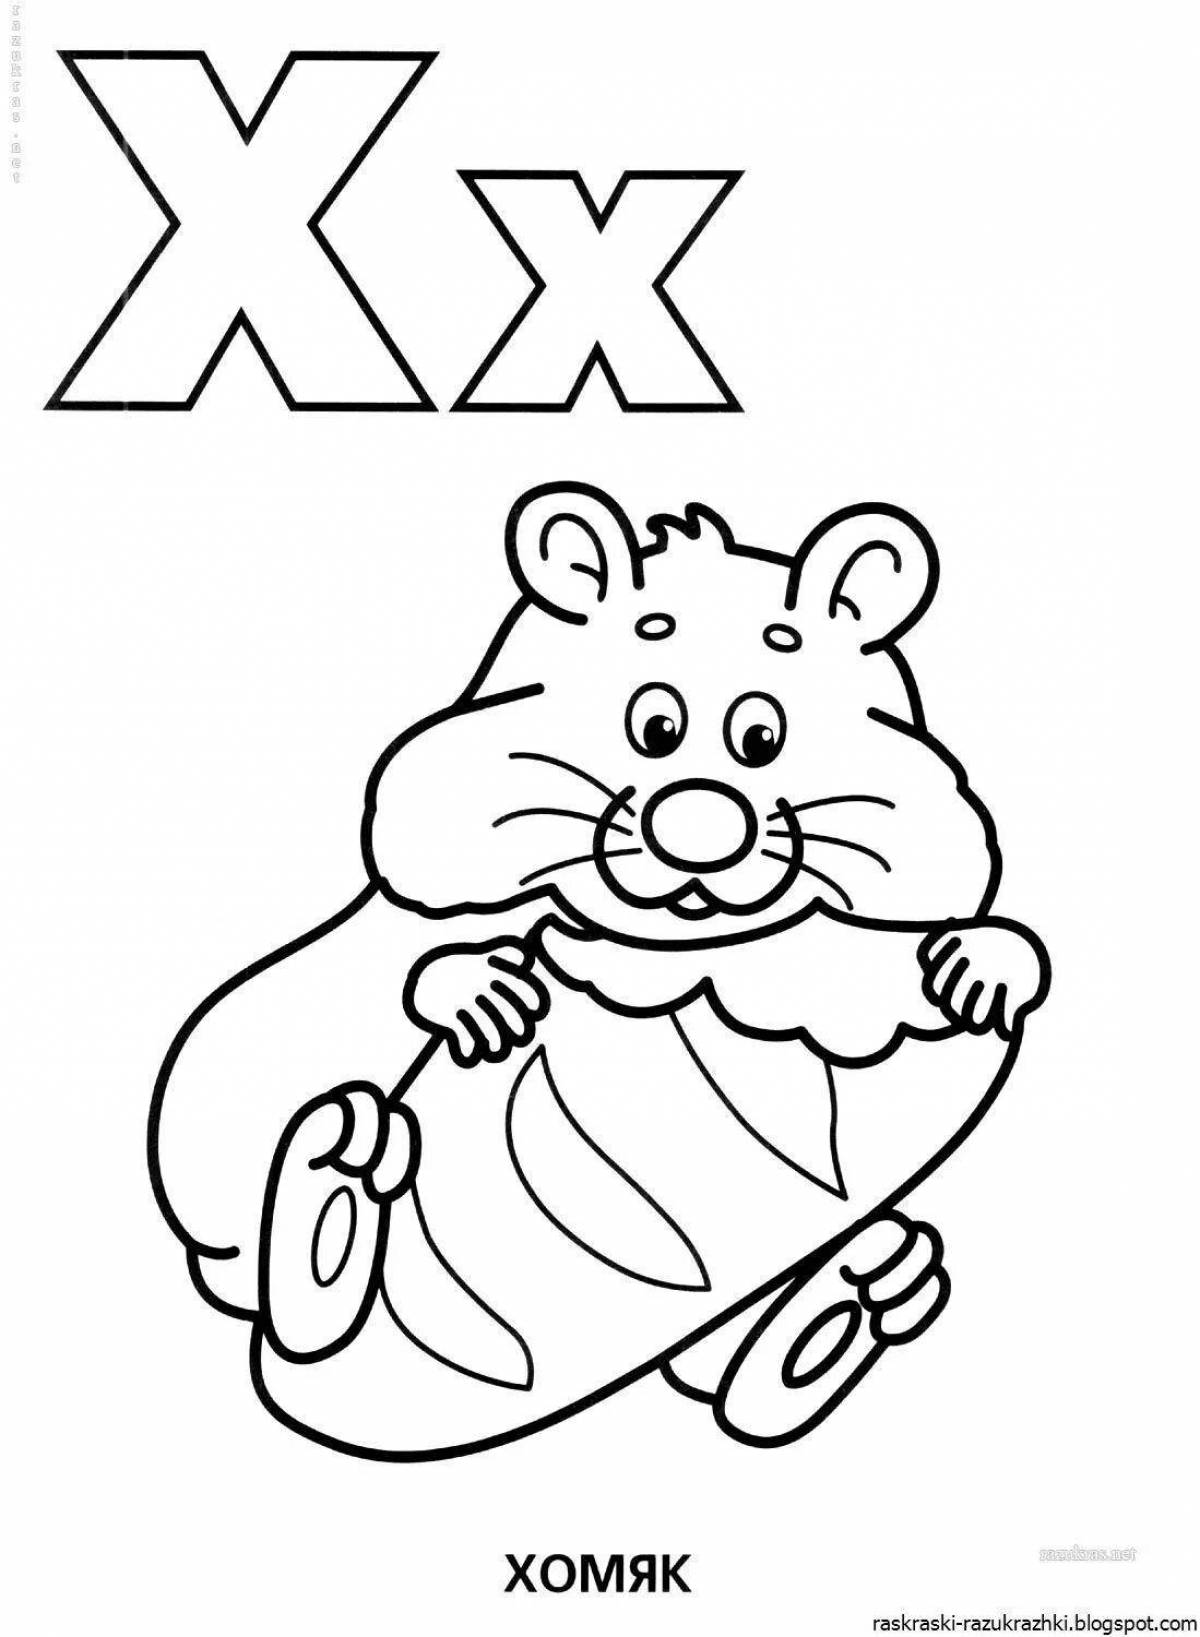 Colorful illustration alphabet x coloring book